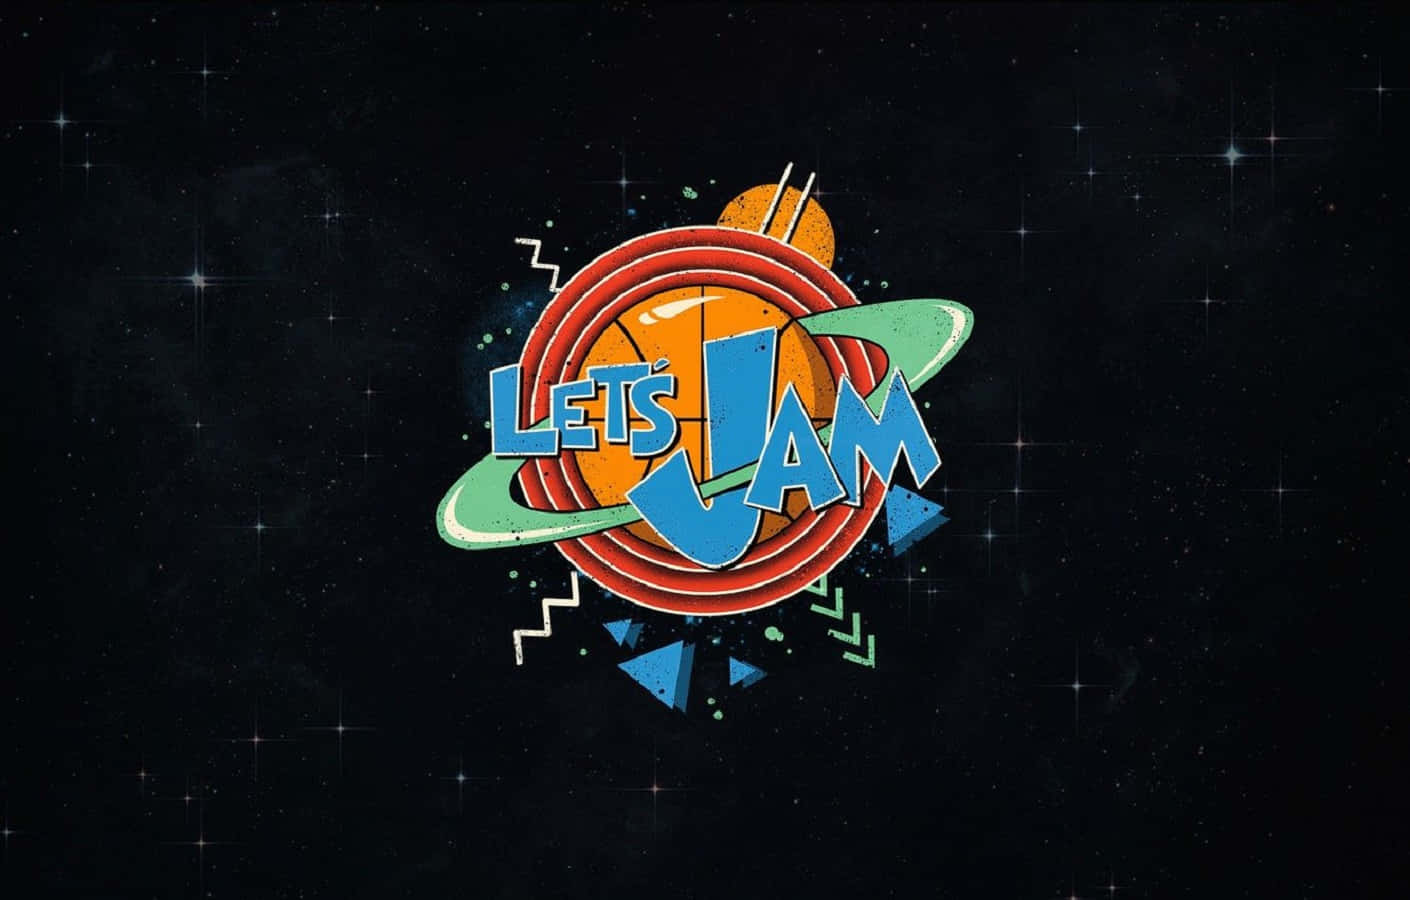 Celebrate the 25th anniversary of Space Jam with this exciting wallpaper ✨